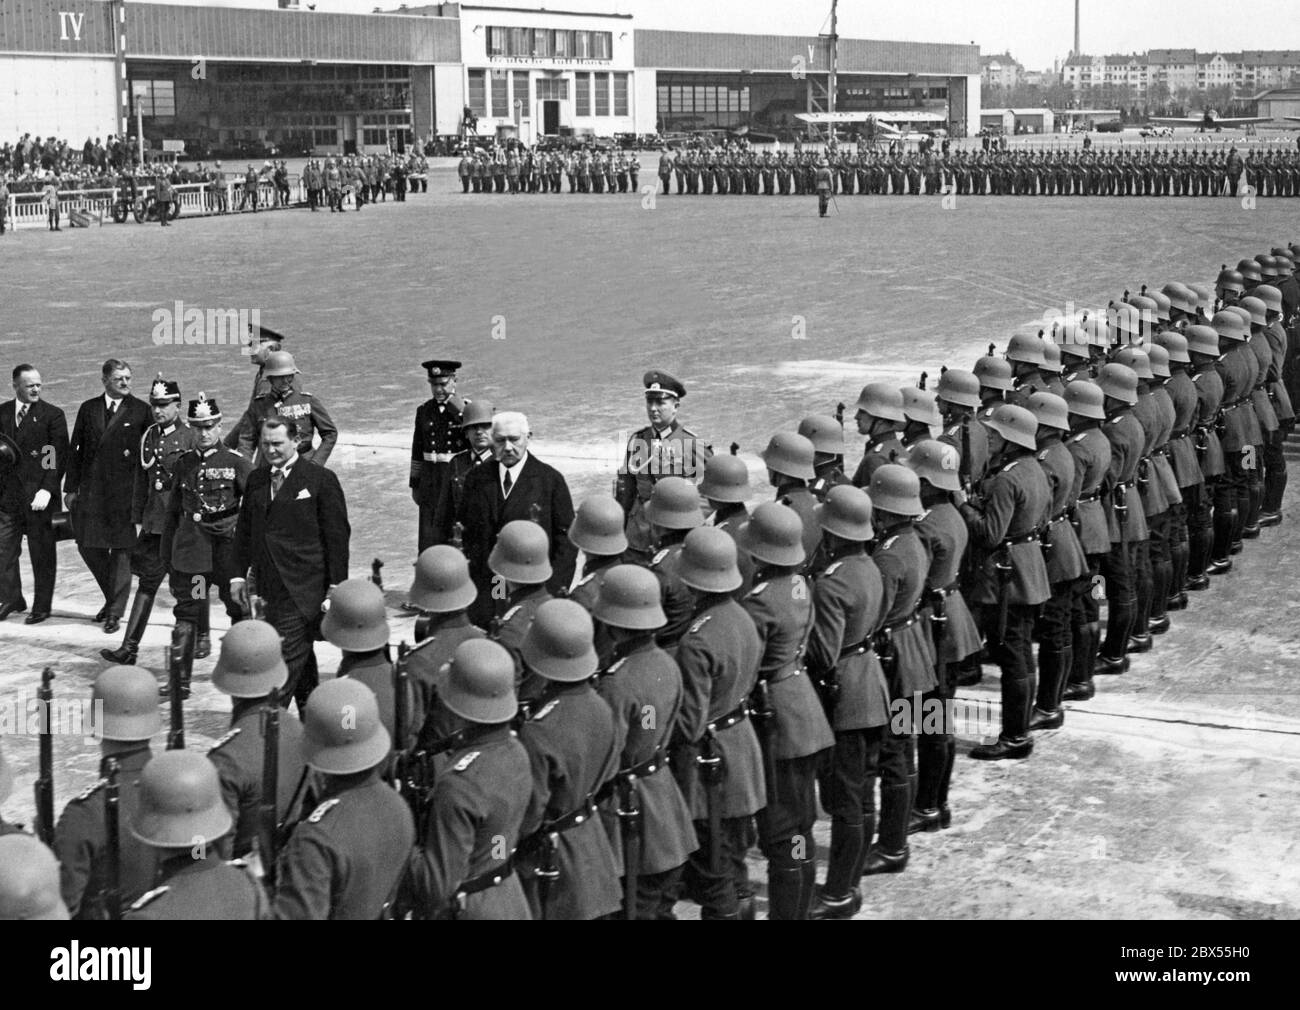 Werner von Blomberg (walking sideways behind with peaked cap), Hermann Goering and Paul von Hindenburg inspect the police formation on the occasion of the christening of a Junkers G 38 with the name Paul von Hindenburg. The then Reich Foreign Minister Konstantin von Neurath was also present at the celebrations. On the left side, 2nd from left, Erhard Milch and on the right, Otto Meissner. Stock Photo